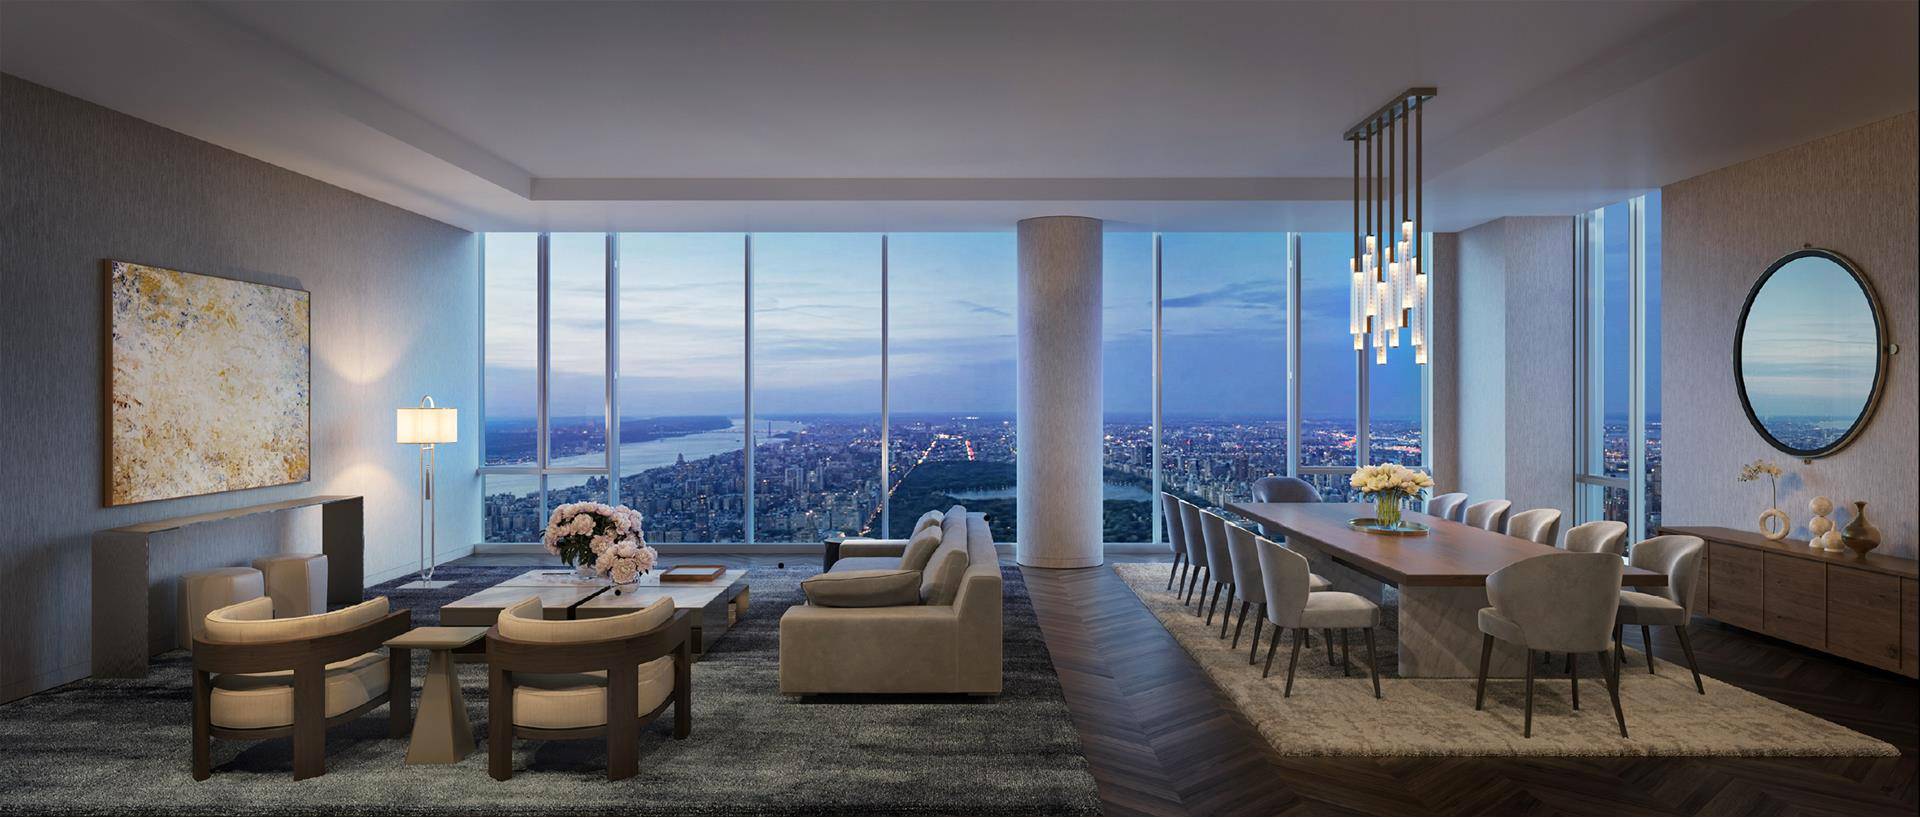 Wrap yourself in the ultimate ambience of luxury, style and sophistication in this expansive residence occupying half of the 86th floor at the coveted new Central Park Tower.